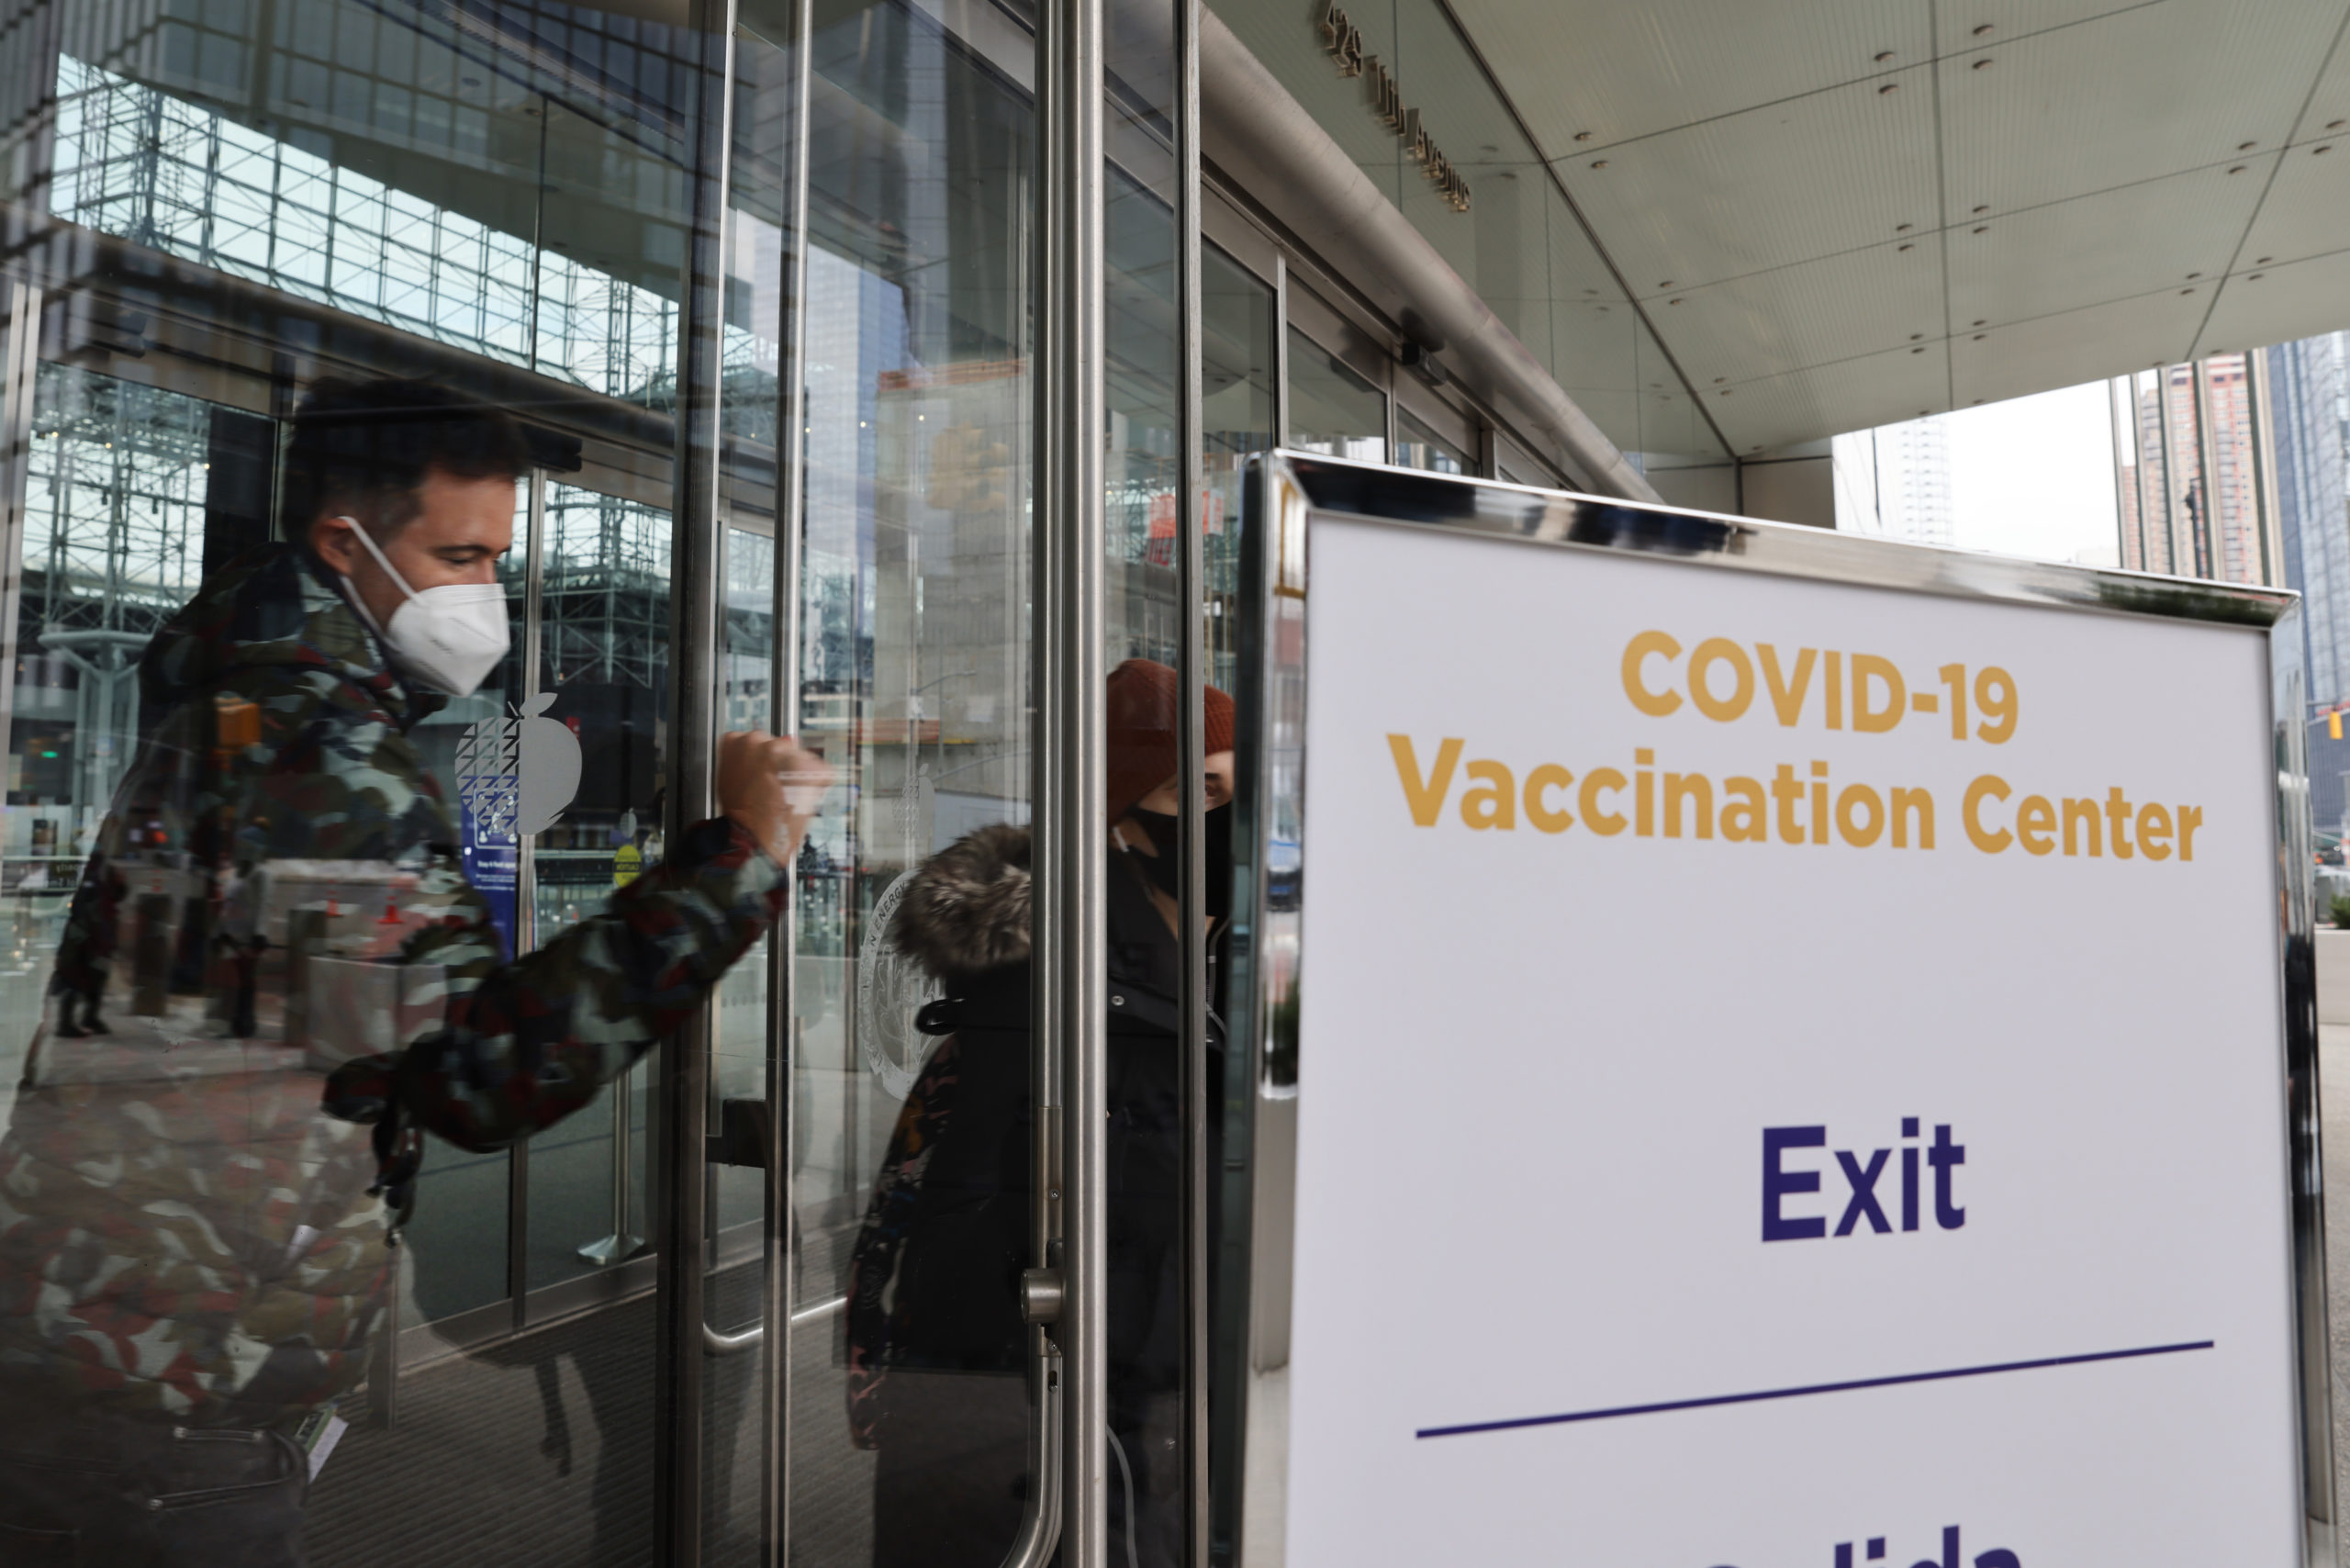 People walk out of Manhattan’s Javits Center which recently opened as a COVID vaccination site on Wednesday in New York City. (Spencer Platt/Getty Images)